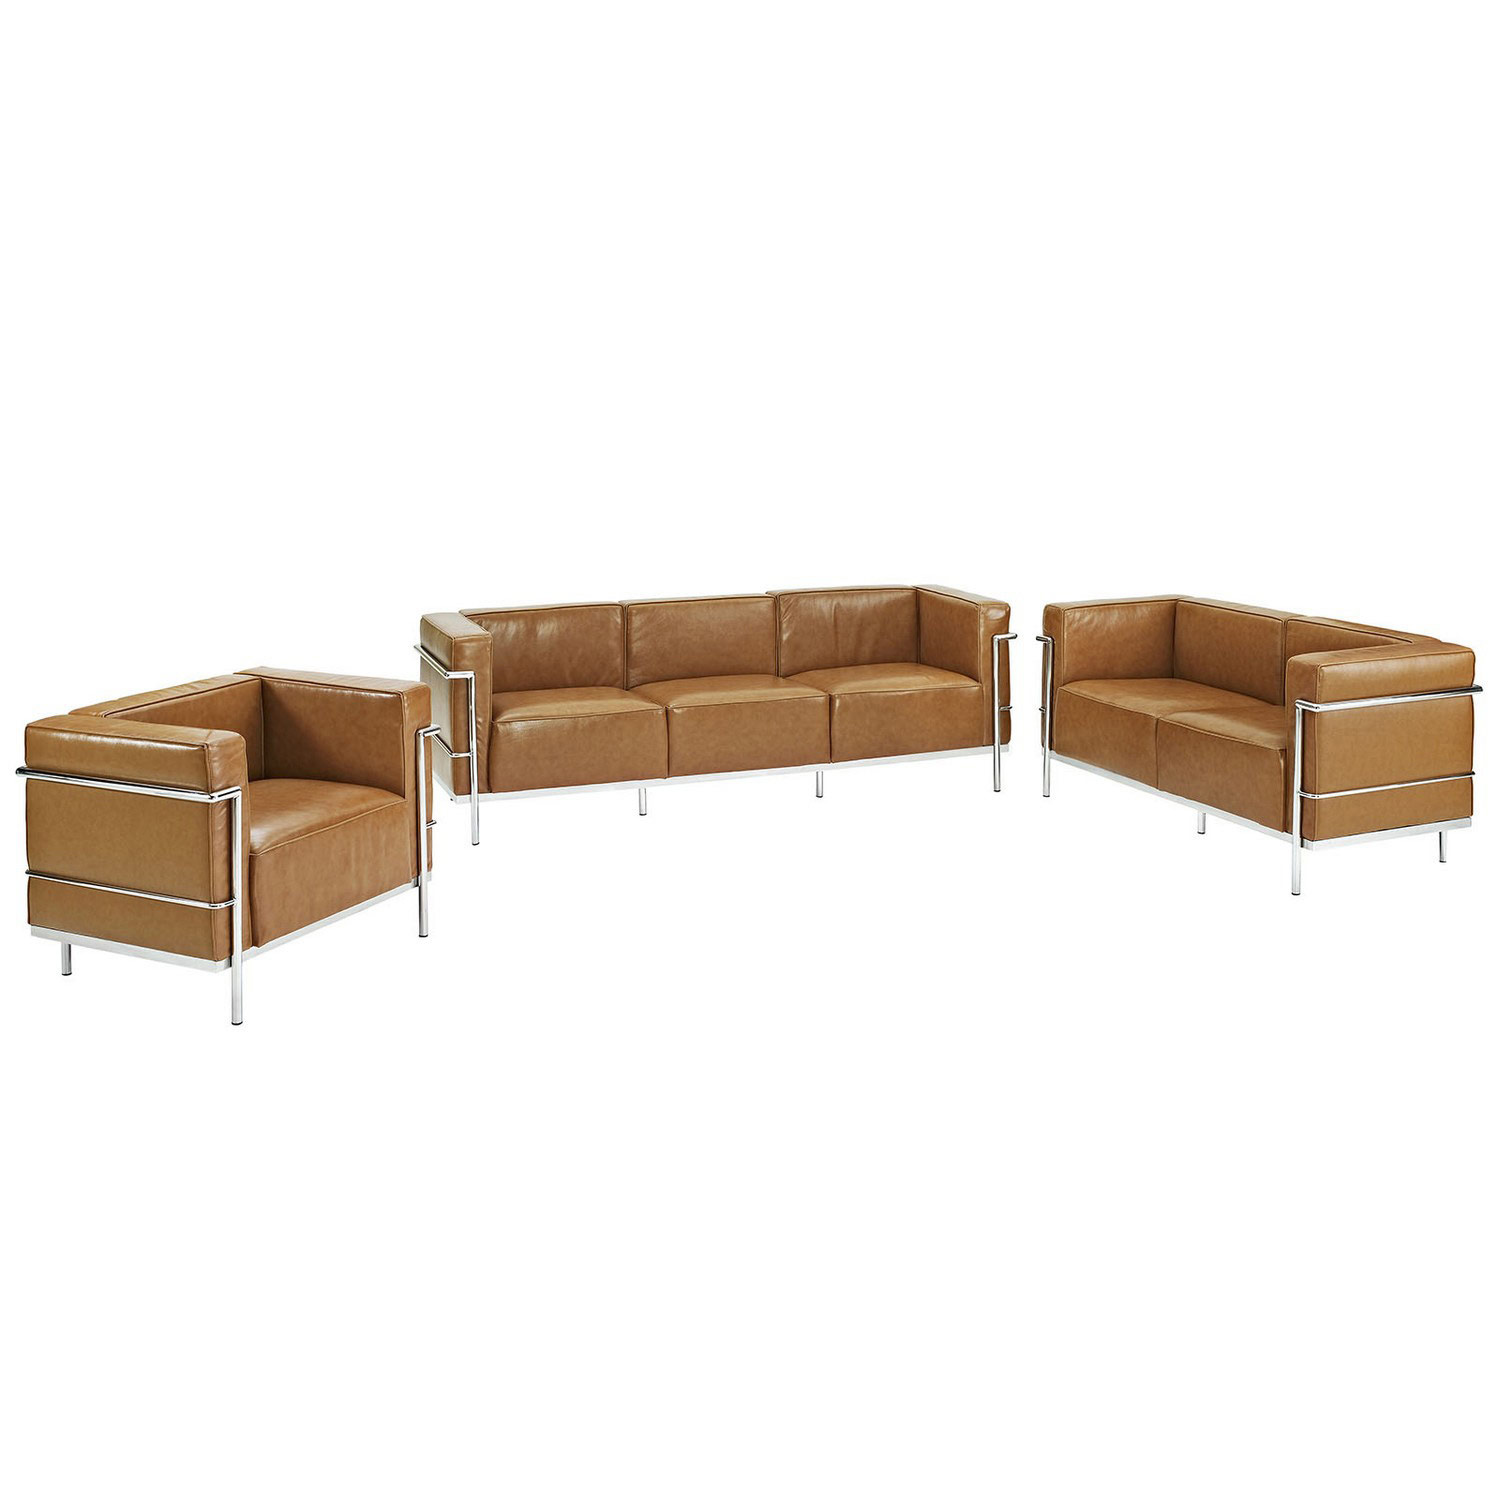 Modway Charles Grande Sofa Loveseat and Armchair Leather Set Of 3 - Tan